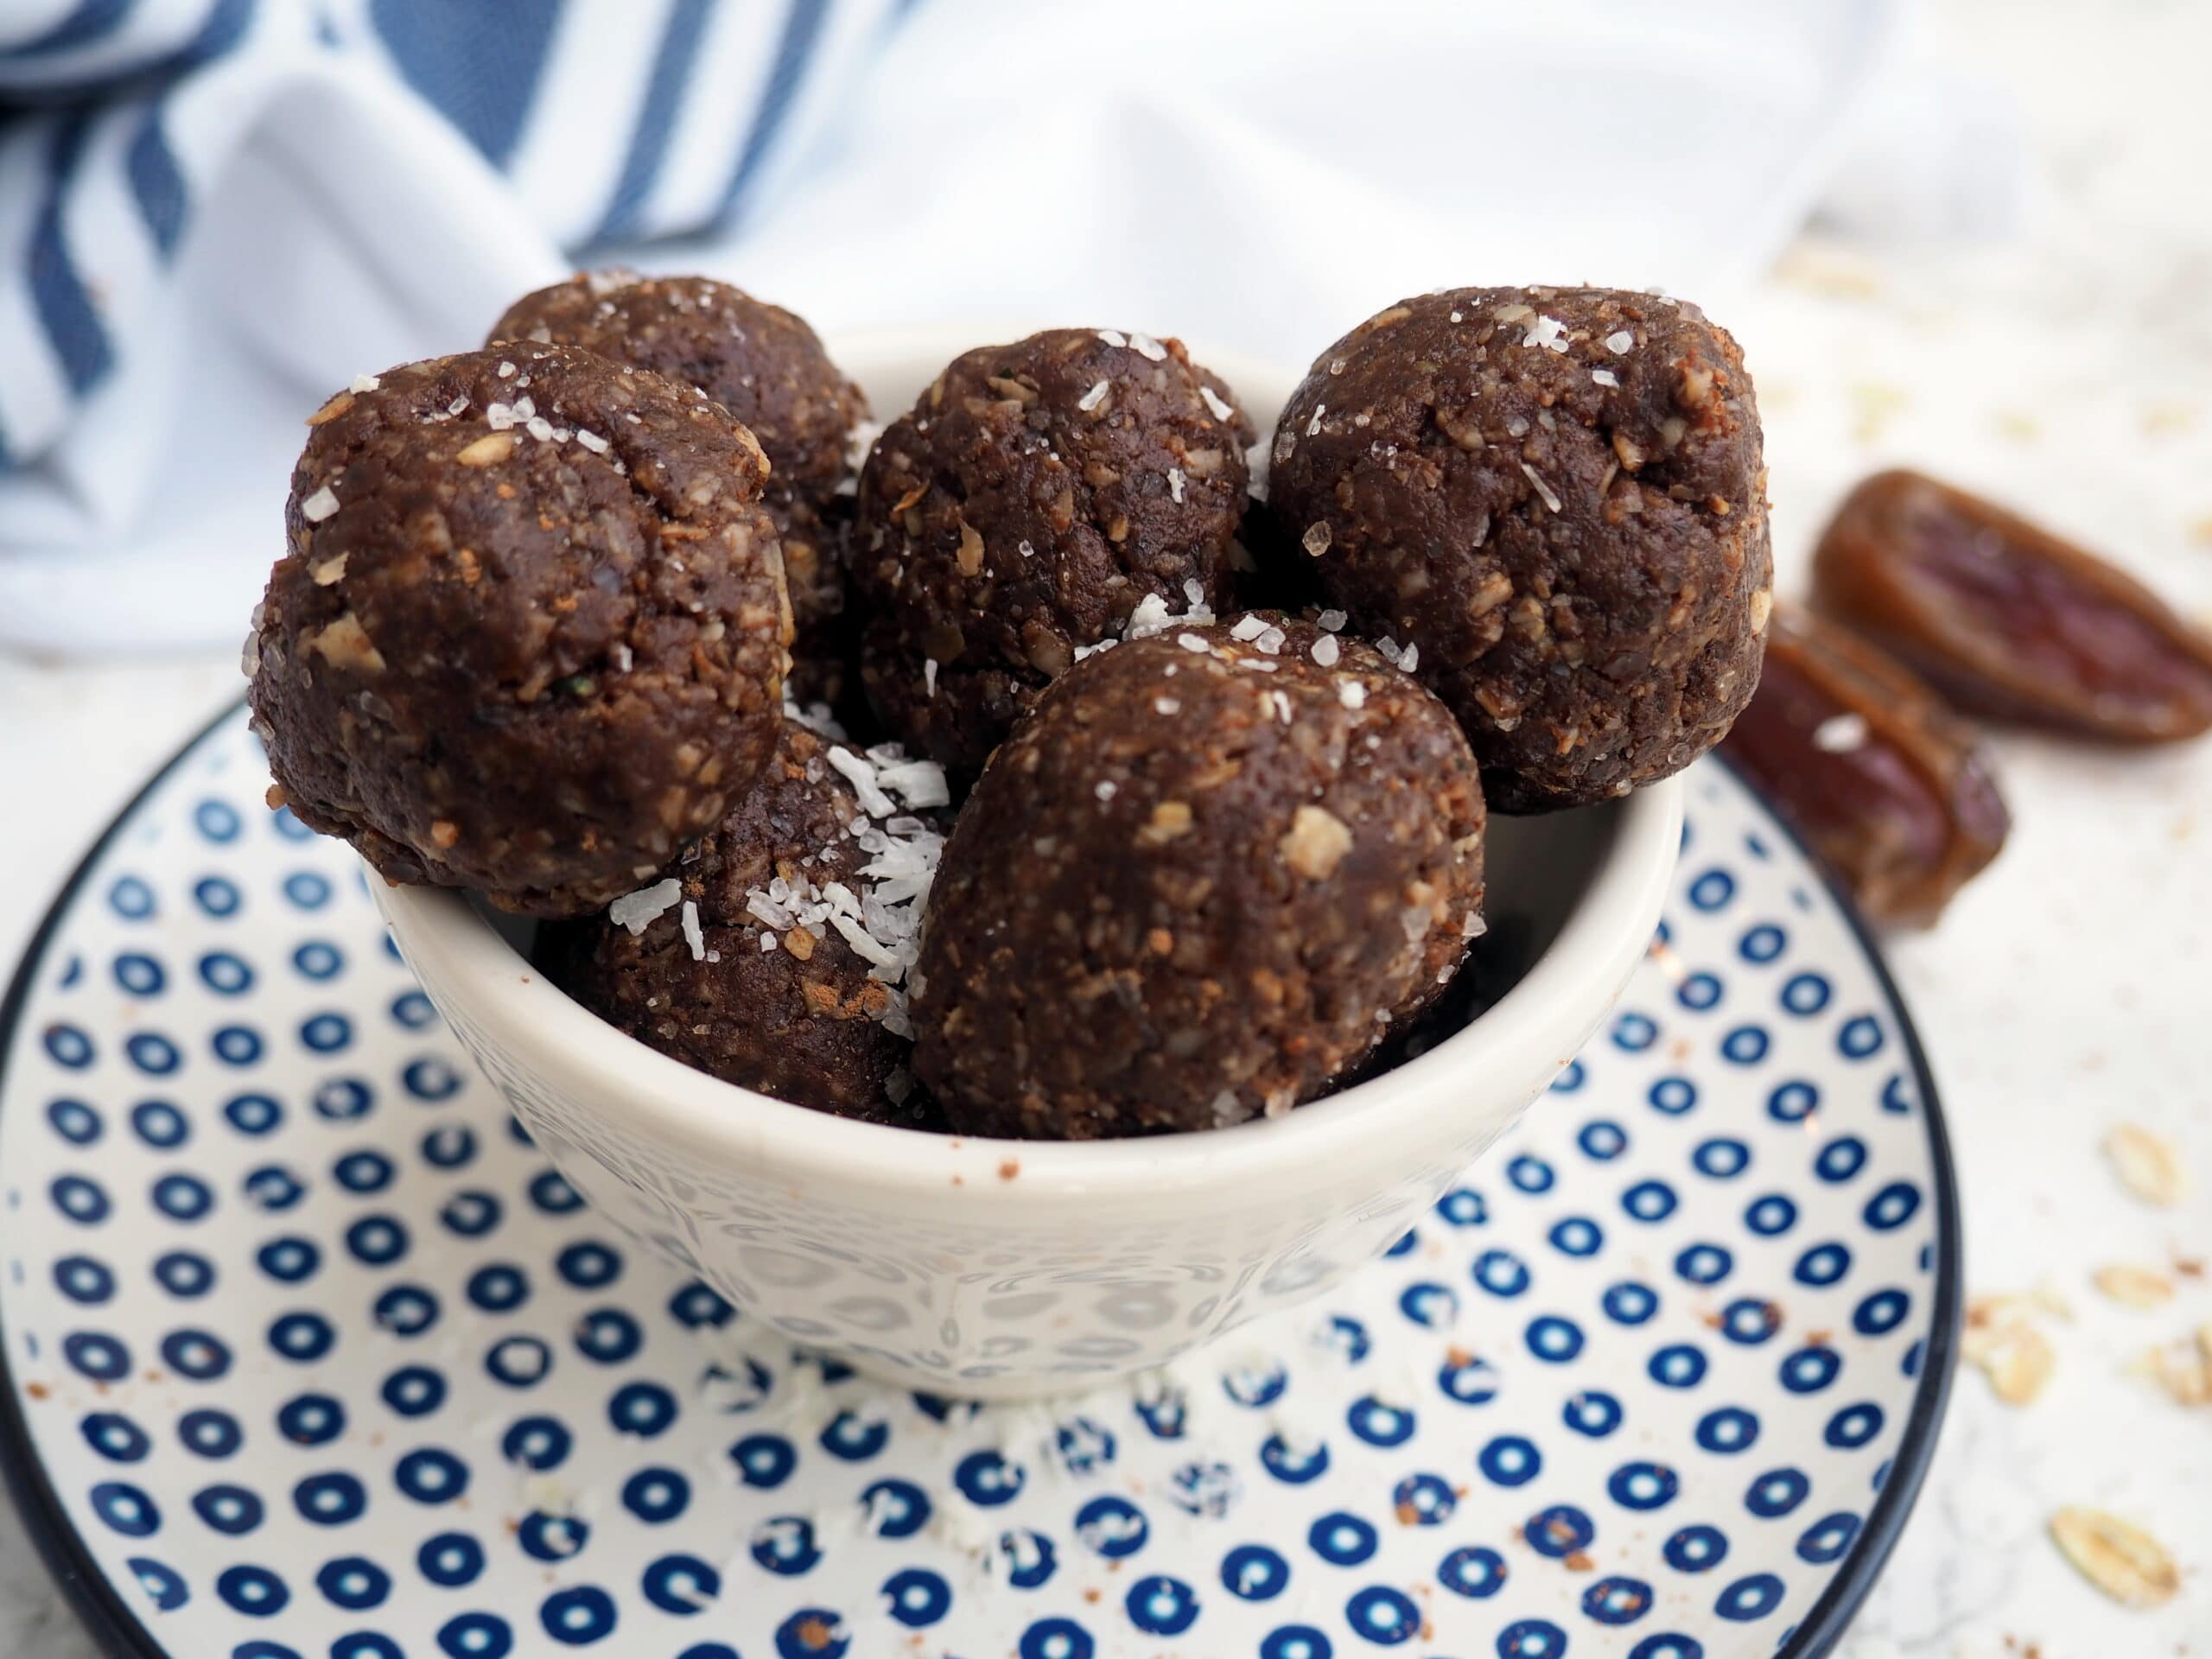 These nut-free cocoa-coconut bliss balls make a perfect lunch box treat! Sweetened with only medjool dates they are sure to be one of your families new favorite treats! They are also gluten-free, soy-free, egg-free, and dairy-free.